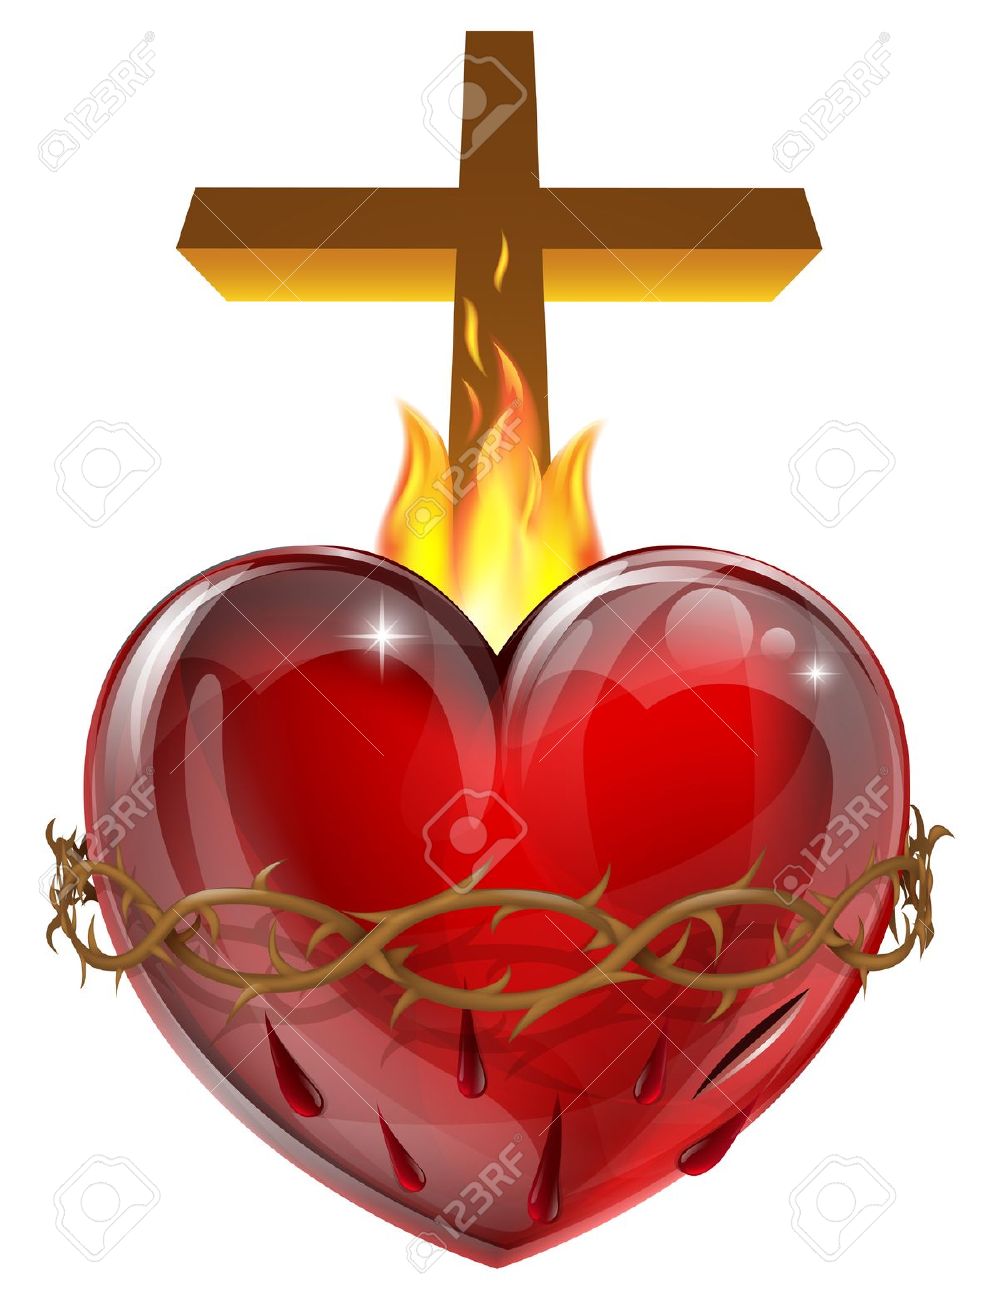 920 Sacred Heart Stock Vector Illustration And Royalty Free Sacred.